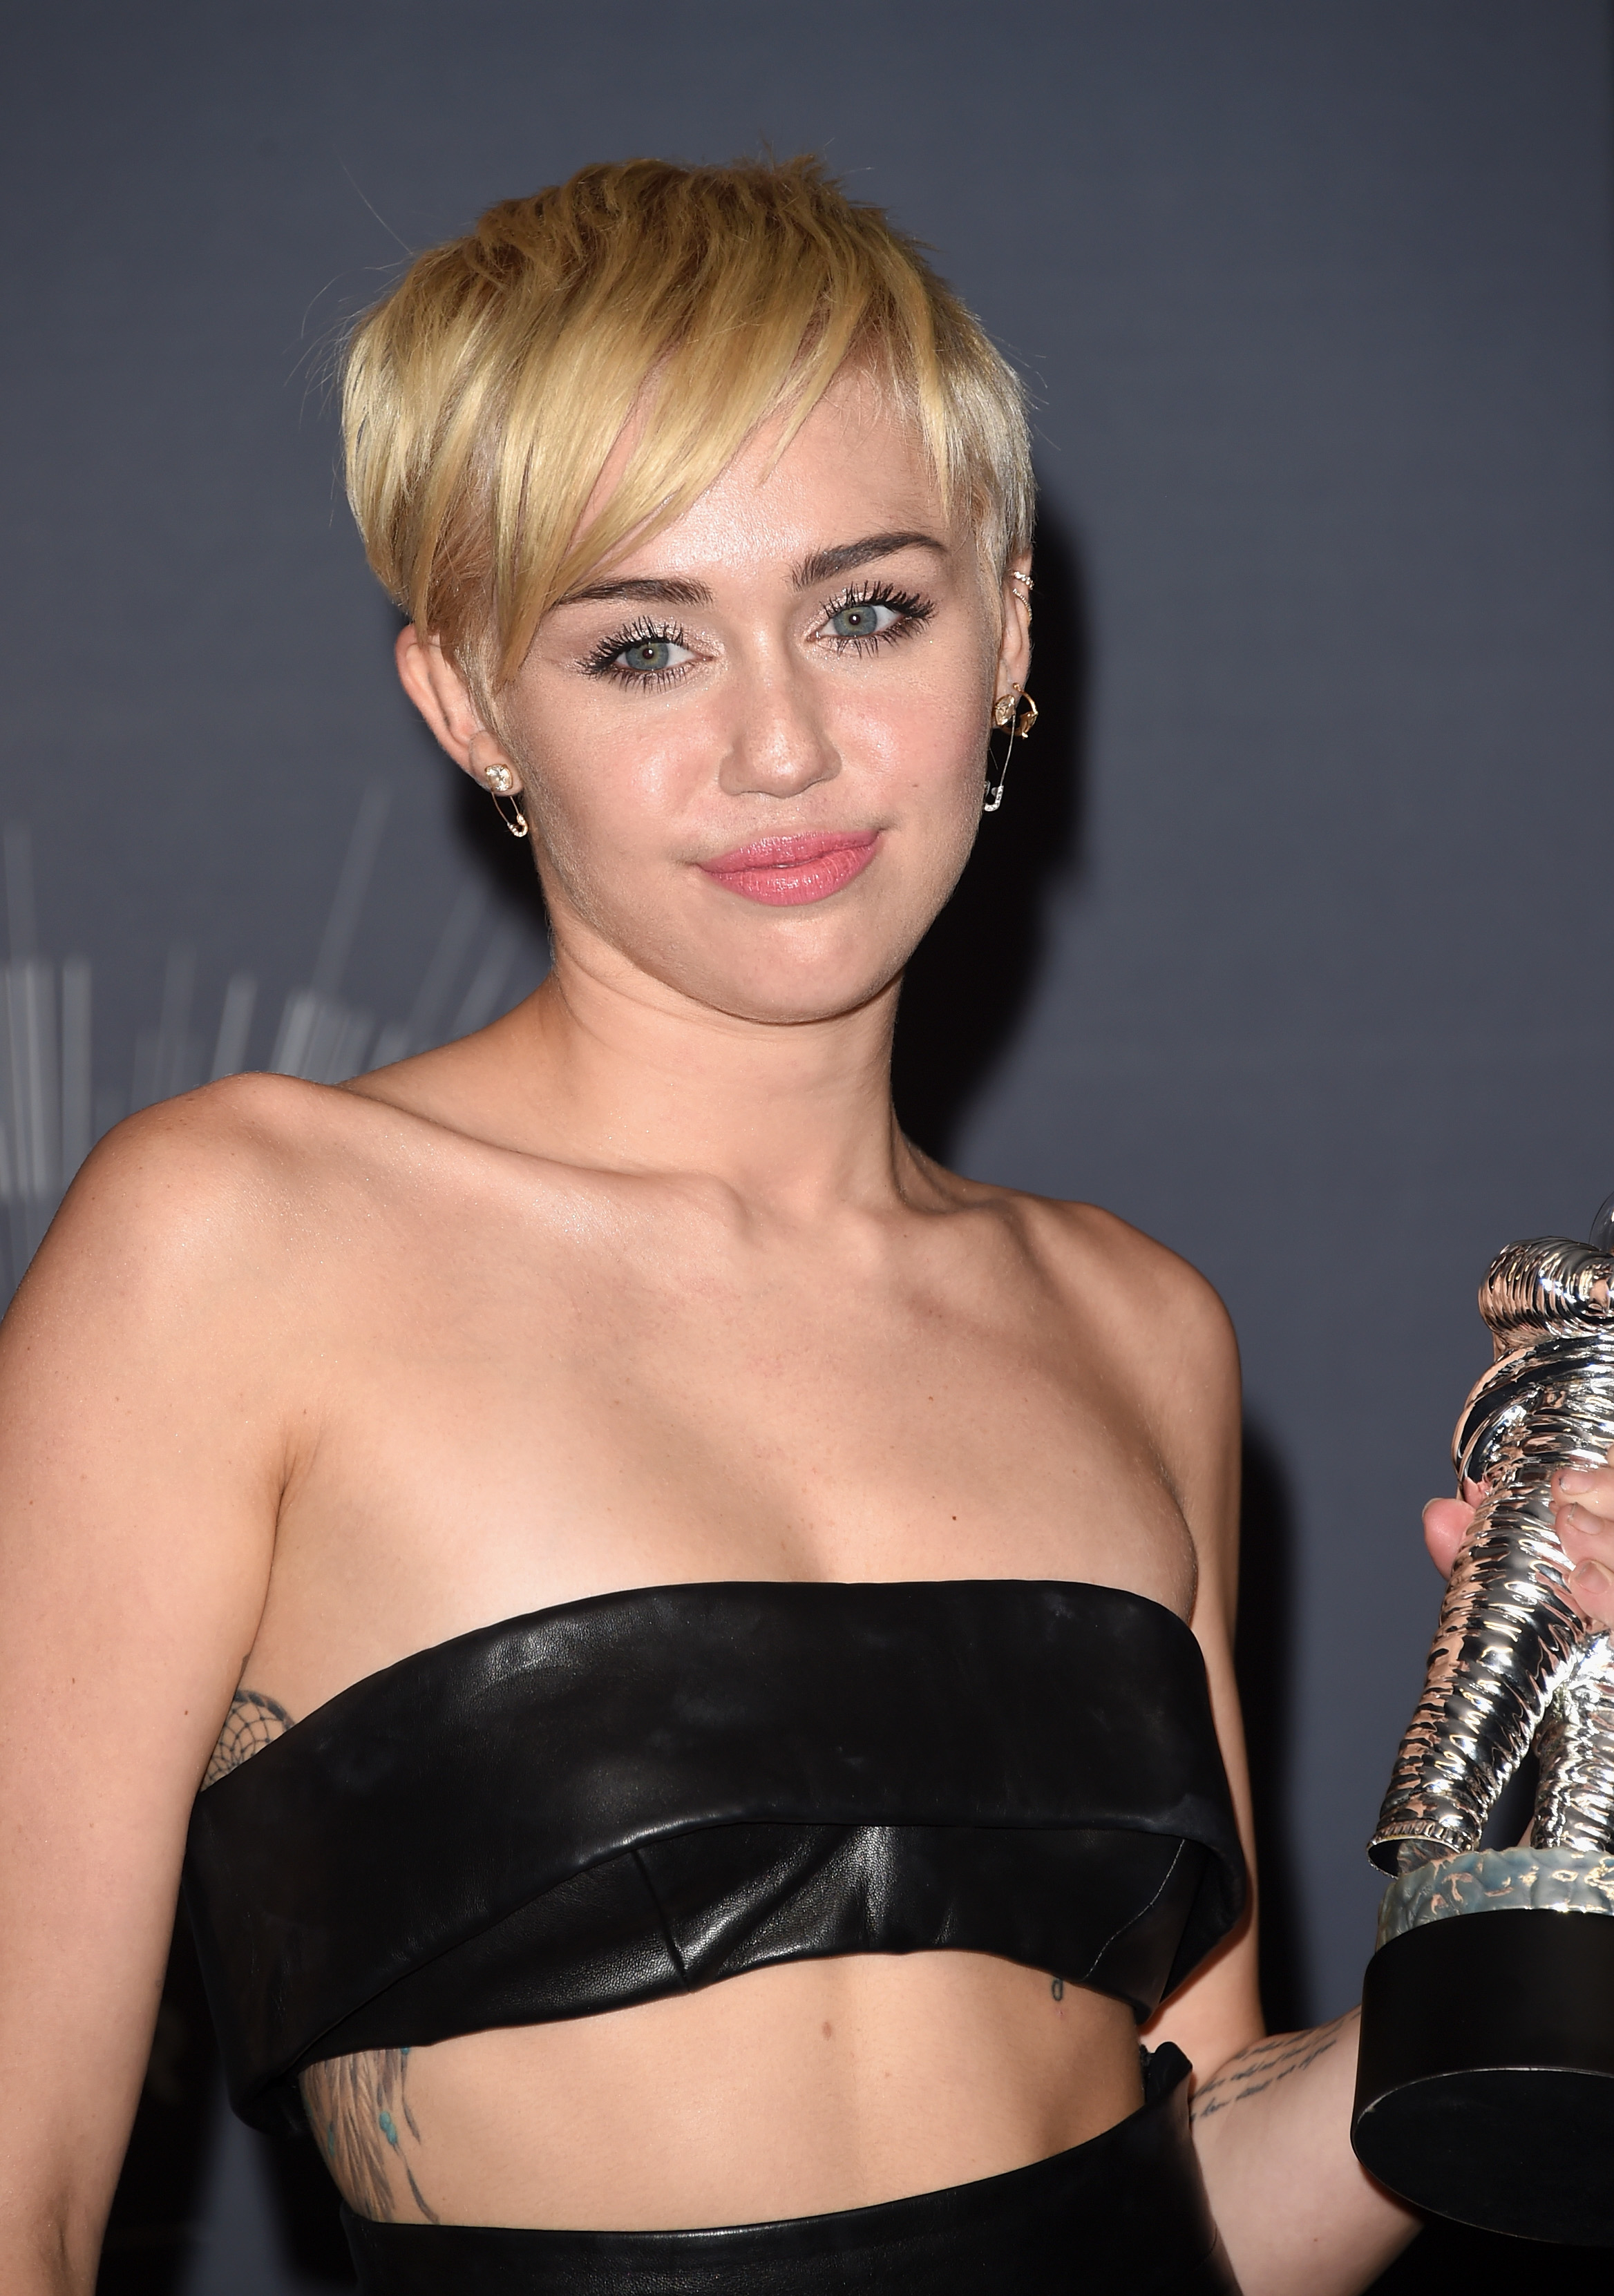 Close-up of Miley holding an award